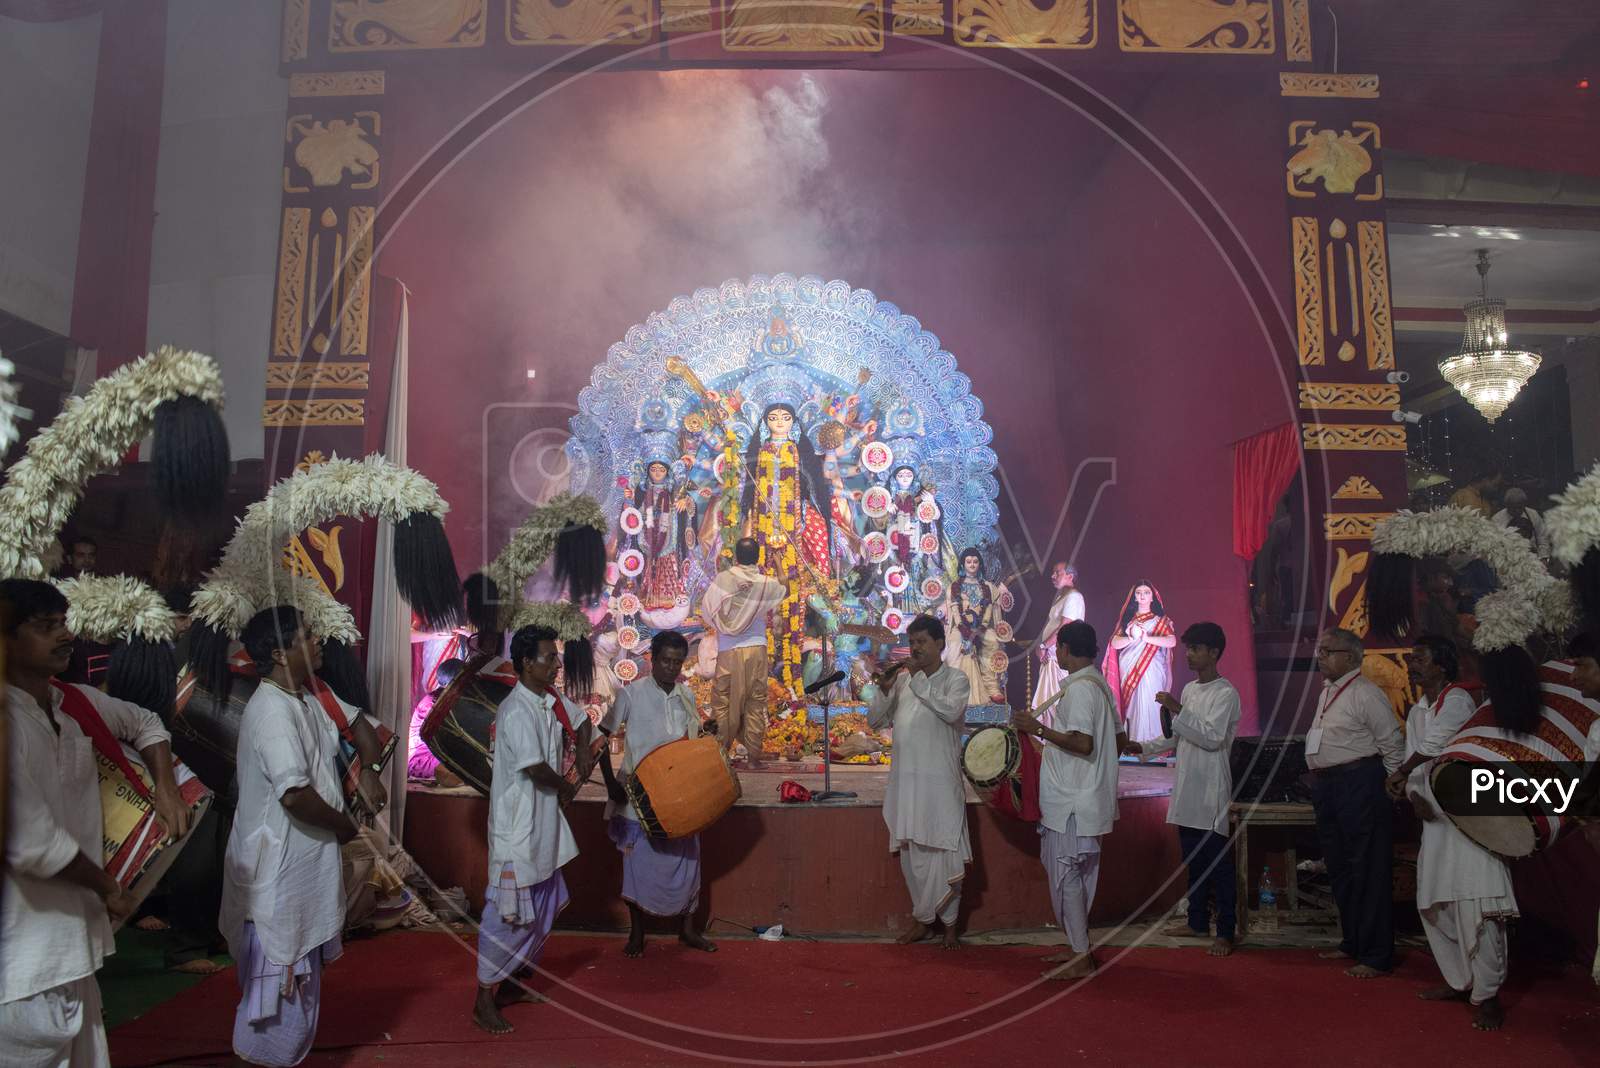 Dussehra Celebrations in a temple